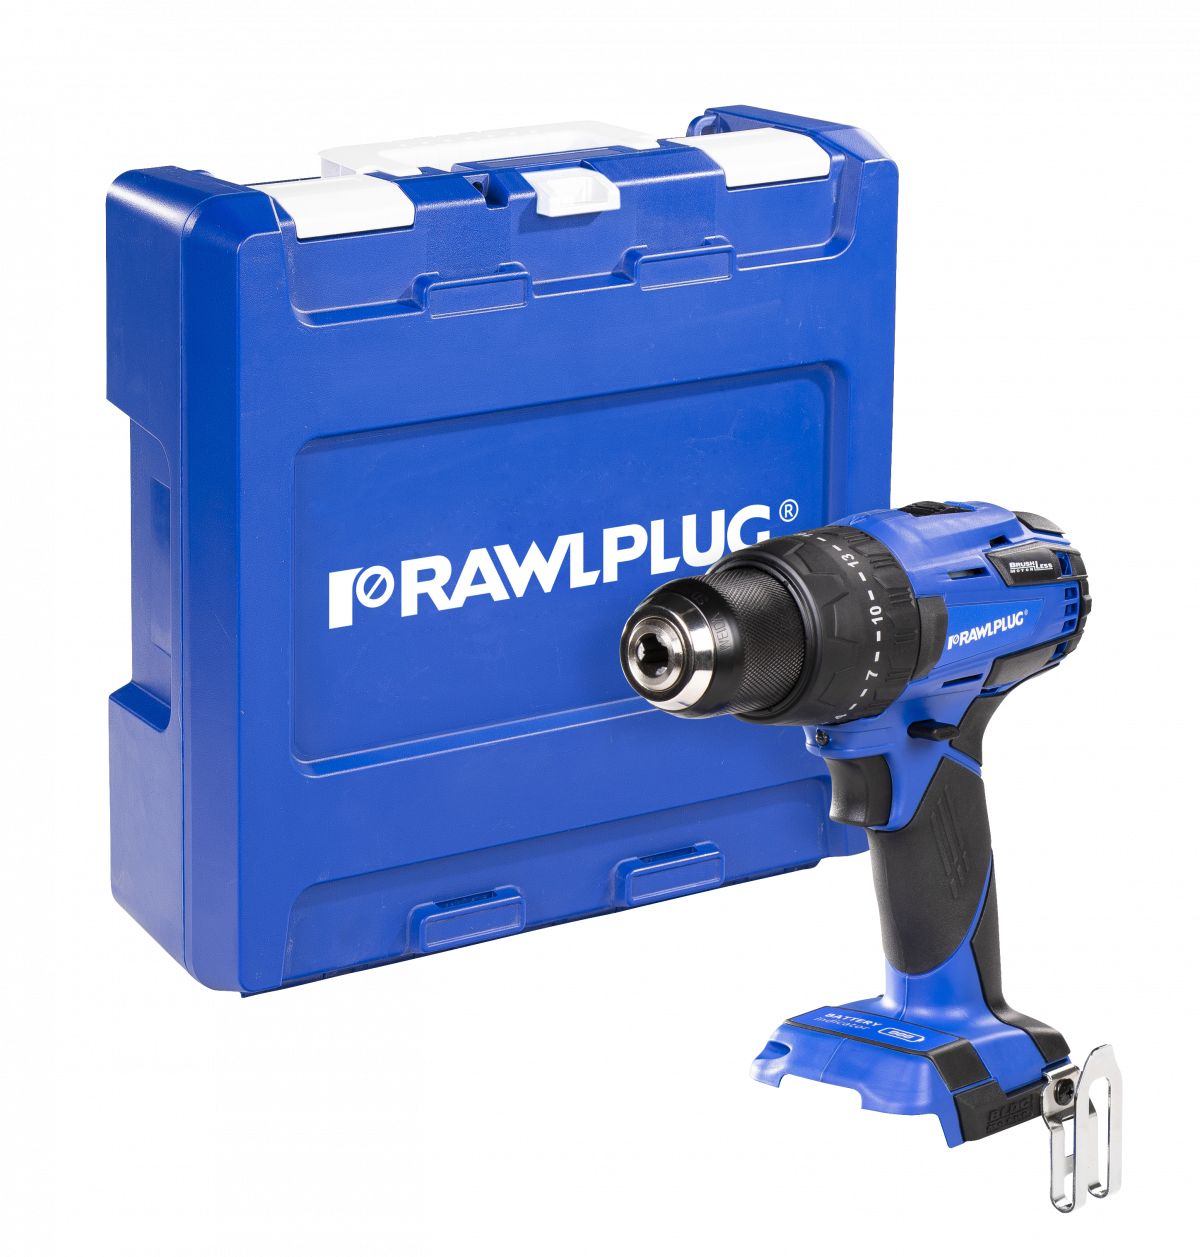 R-PDD18-S Cordless RawlDriver 18V bare tool, in a transport case